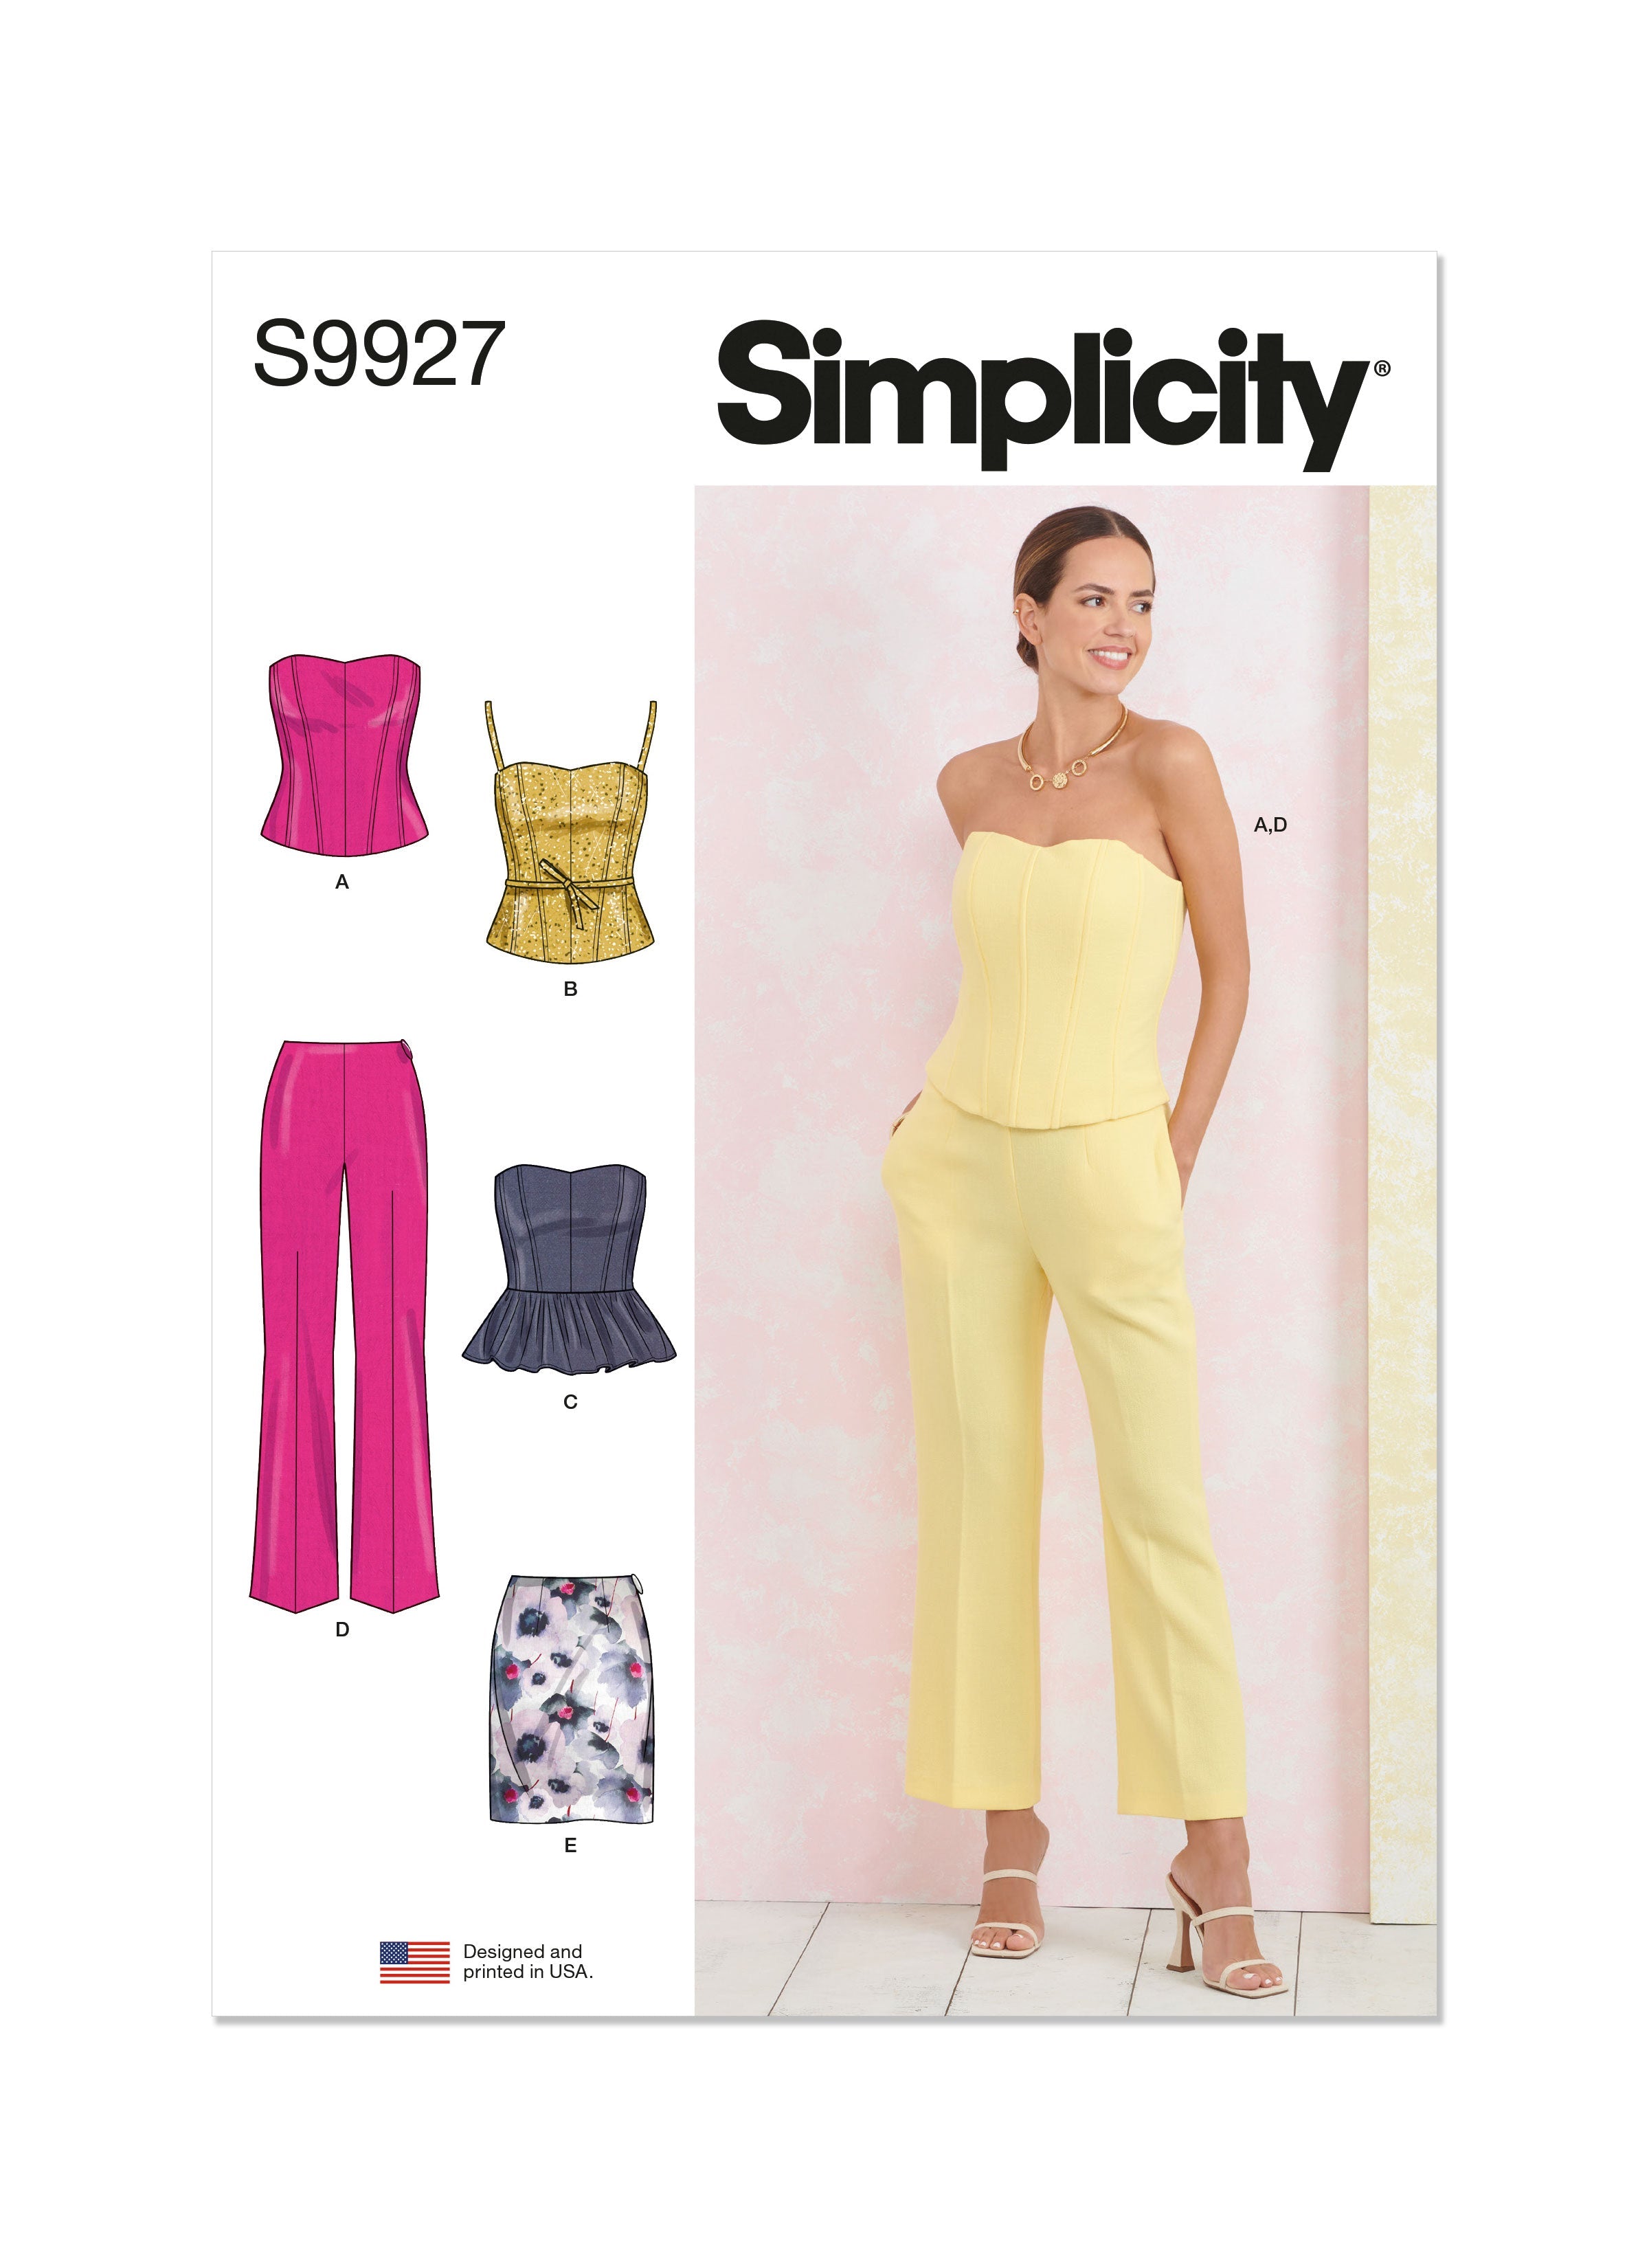 Simplicity Sewing Pattern 9927 Misses' Corsets, Pants and Skirt from Jaycotts Sewing Supplies